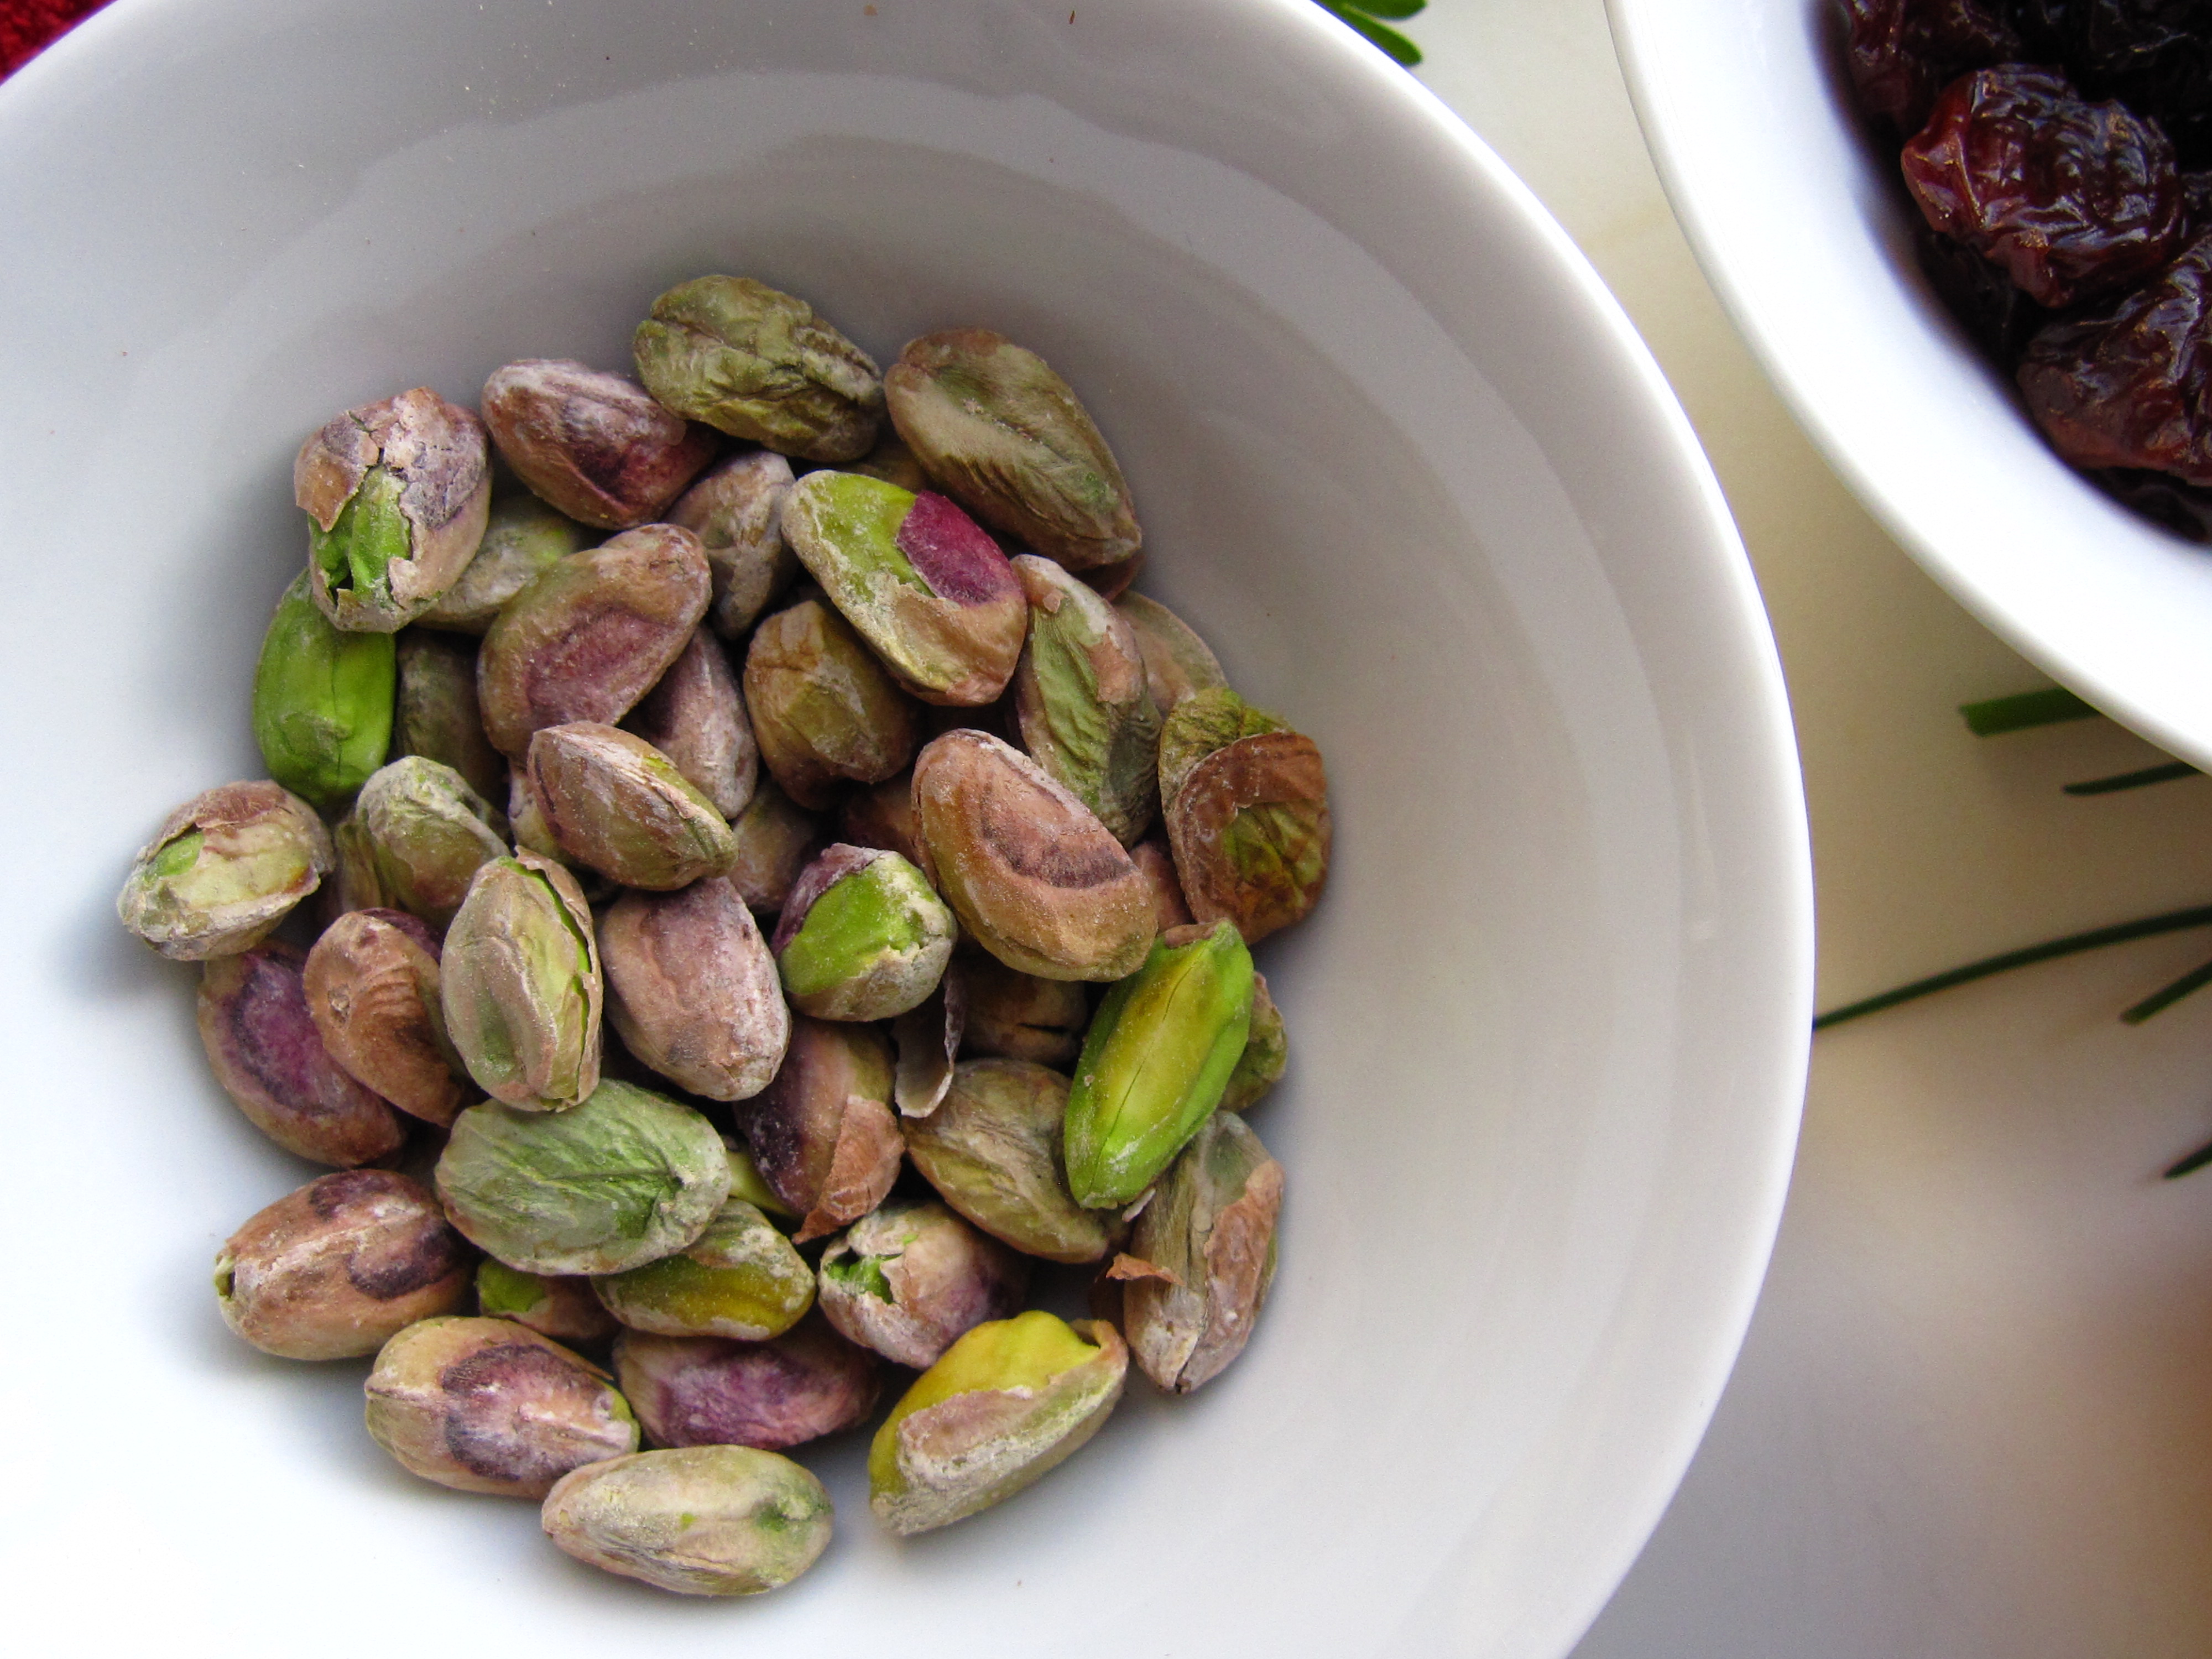 Shelled pistachios in a white bowl.